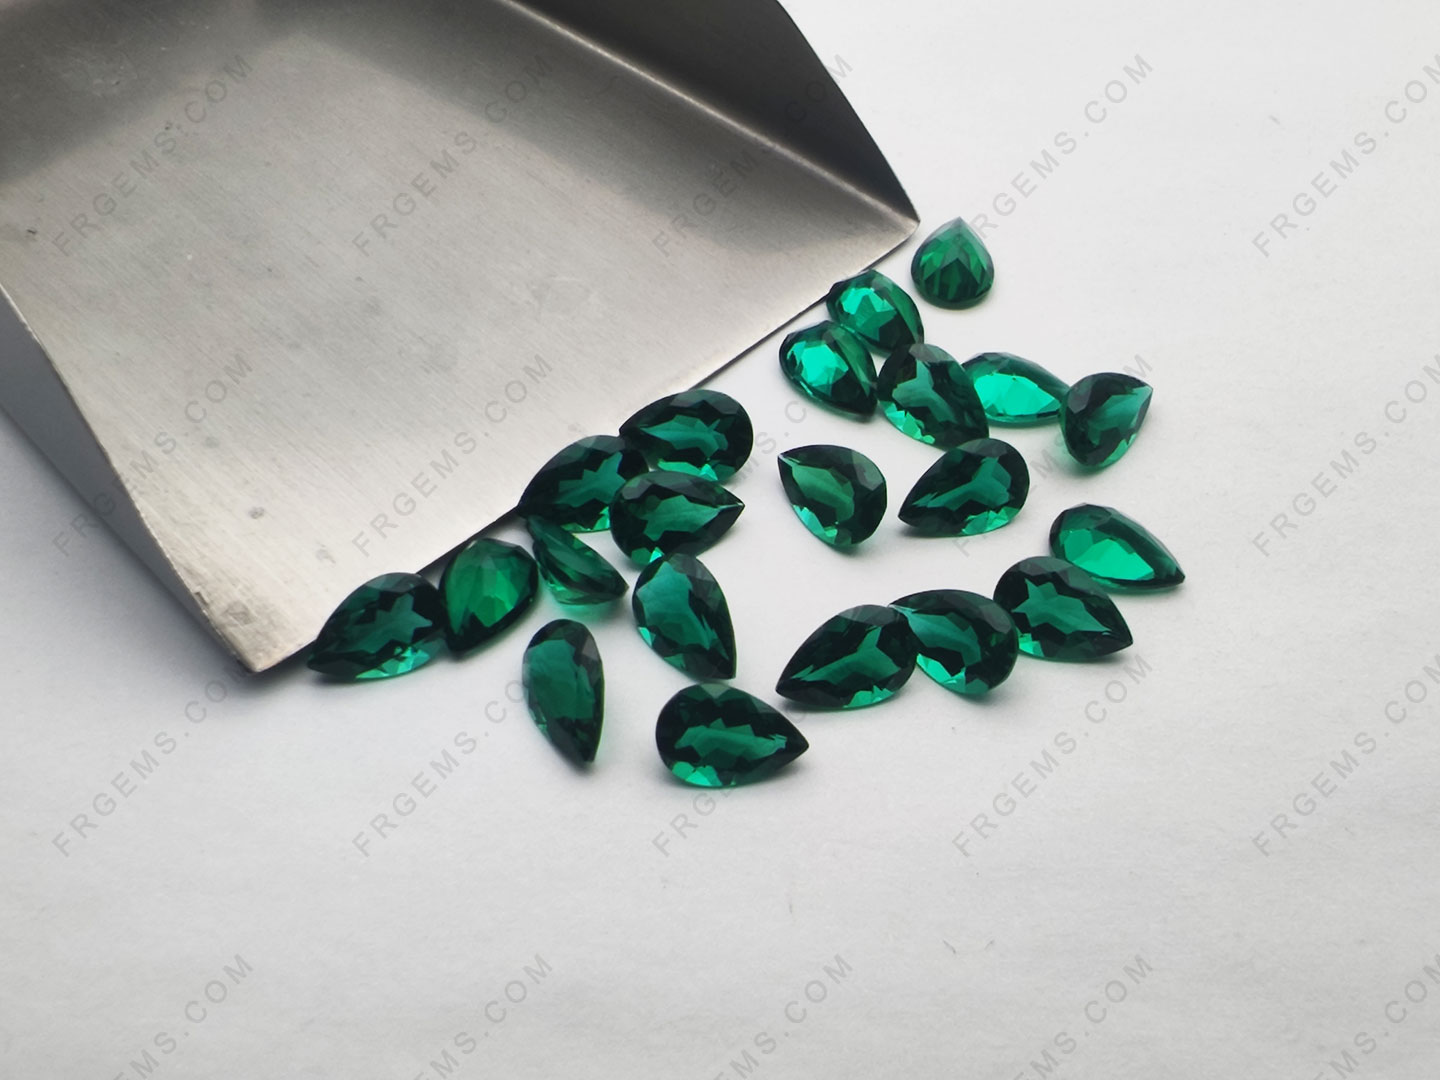 Wholesale Lab Grown Emerald Green Zambia Green Color Pear Shaped 9x6mm faceted gemstones